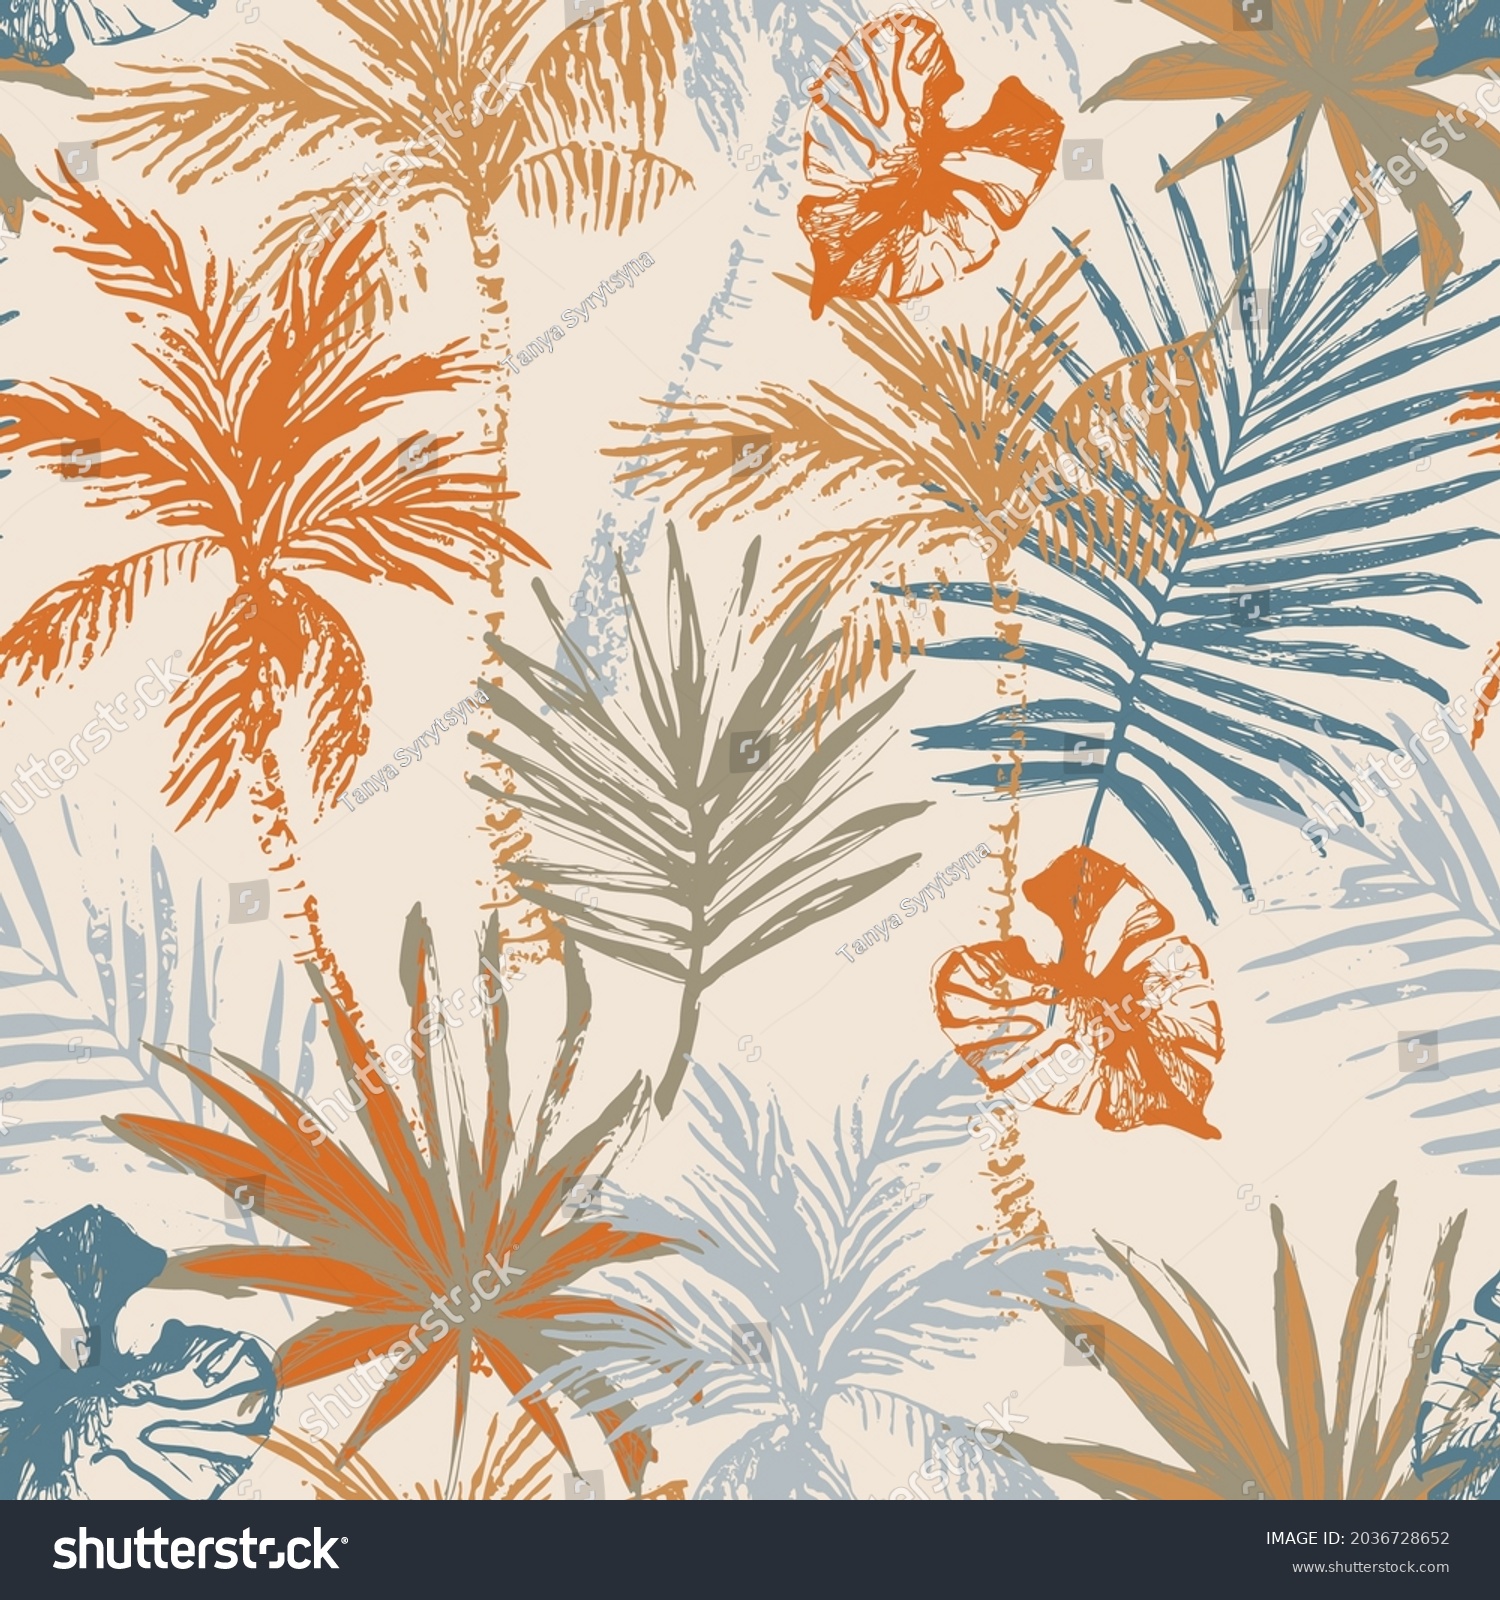 SVG of Beautiful abstract tropics seamless pattern. Grunge palm trees, tropical leaves on beige background. Exotic beach island and ocean concept for summer wallpaper design in vector hand drawn style. svg